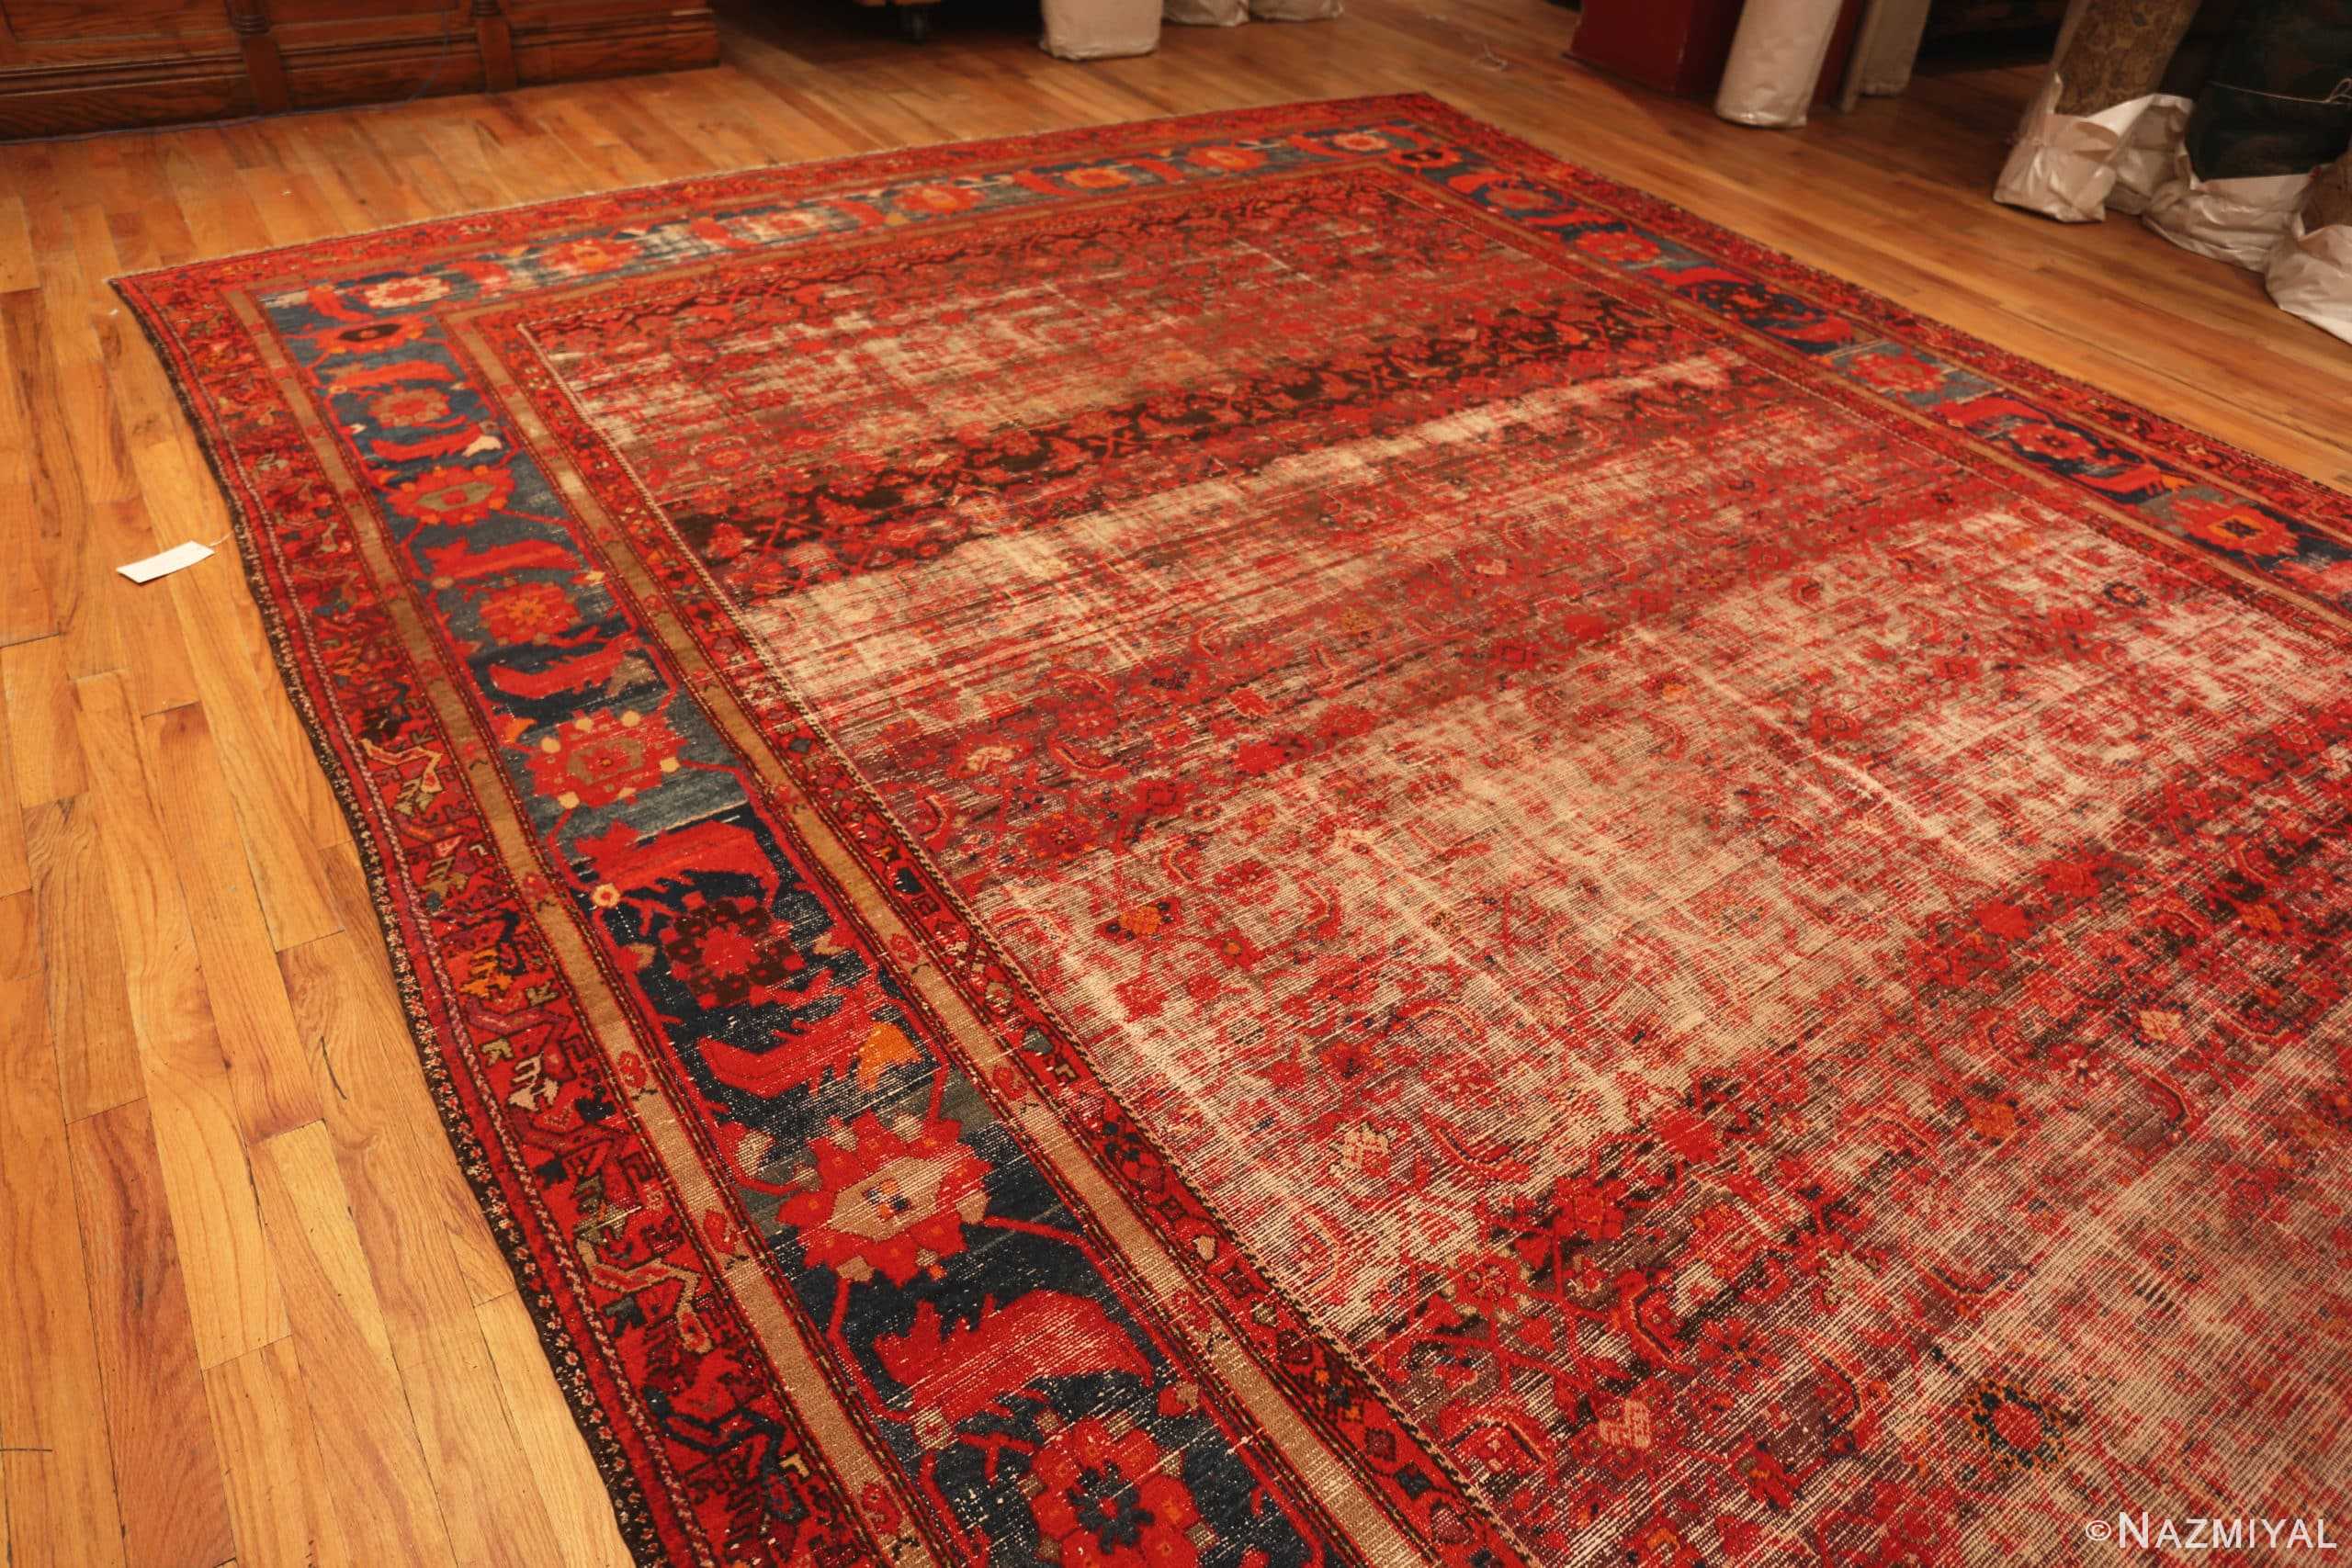 Side Of Large Shabby Chic Antique Persian Malayer Rug 71297 by Nazmiyal Antique Rugs